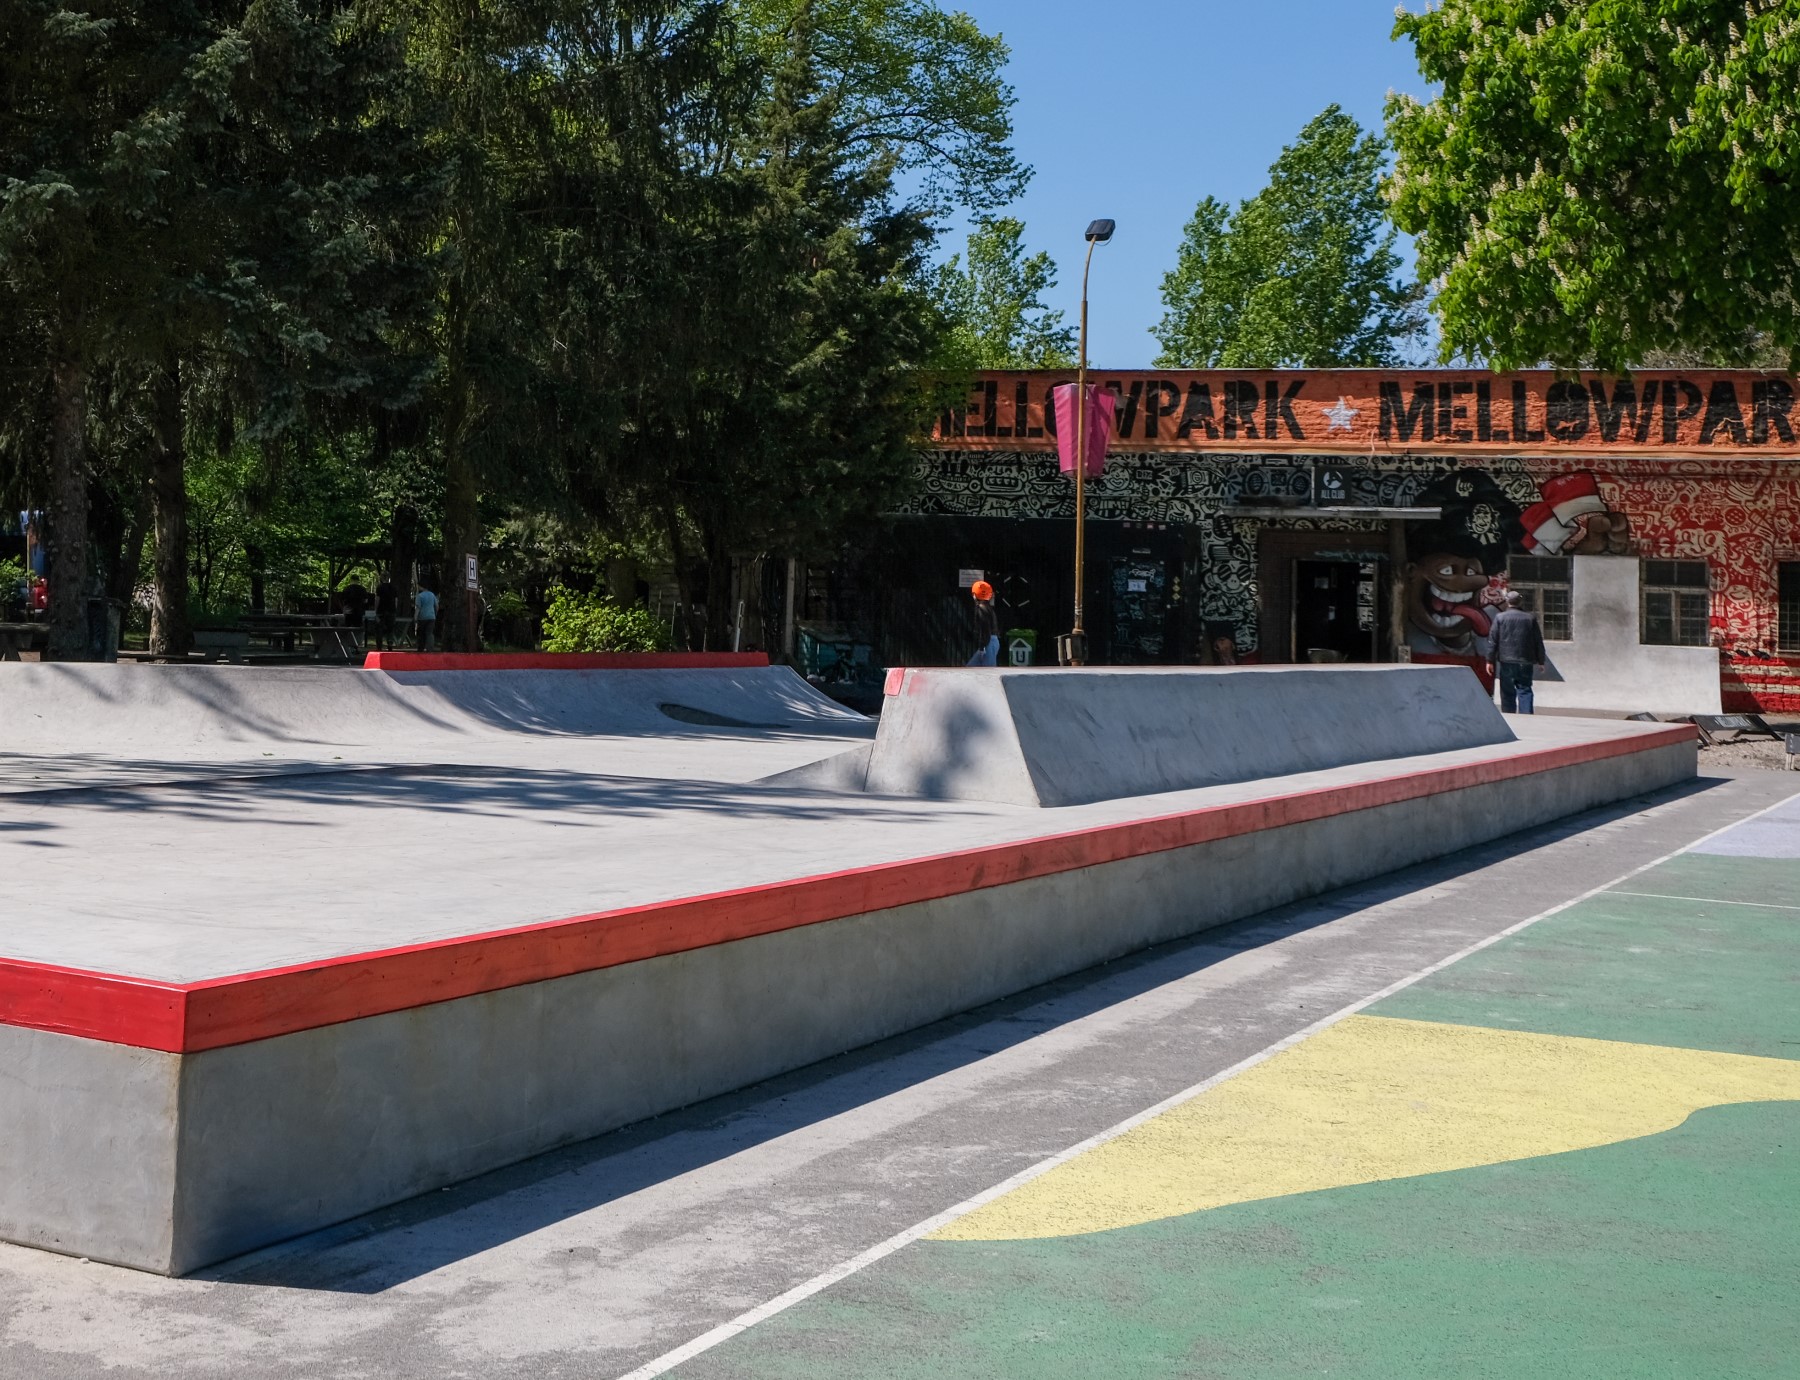 Mellowpark skate park in Berlin: concrete surface with outstanding concrete elements